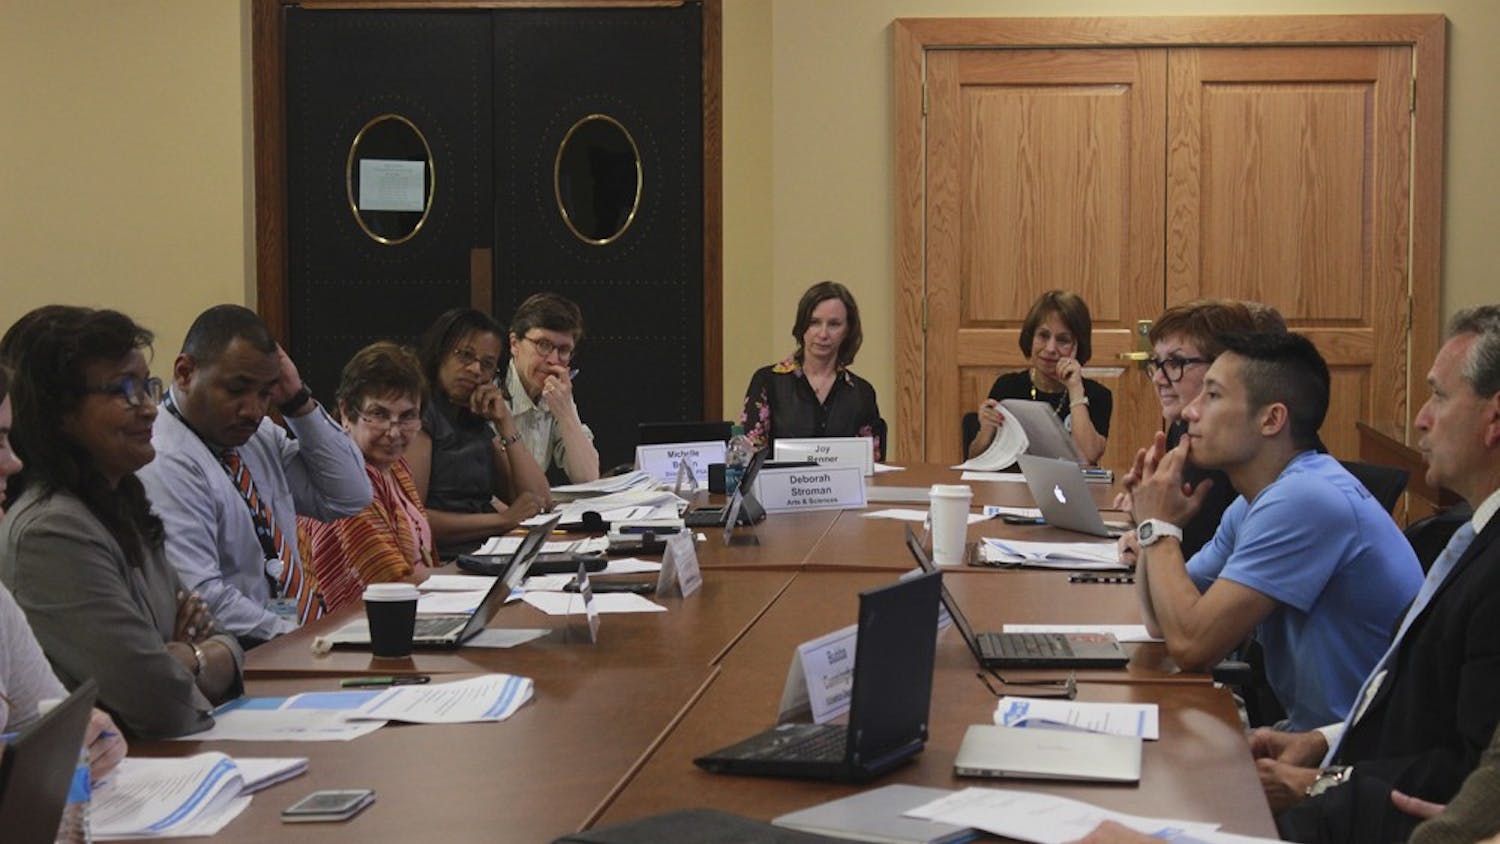 The Faculty Athletics Committee met Tuesday afternoon in a Wilson Library meeting room.